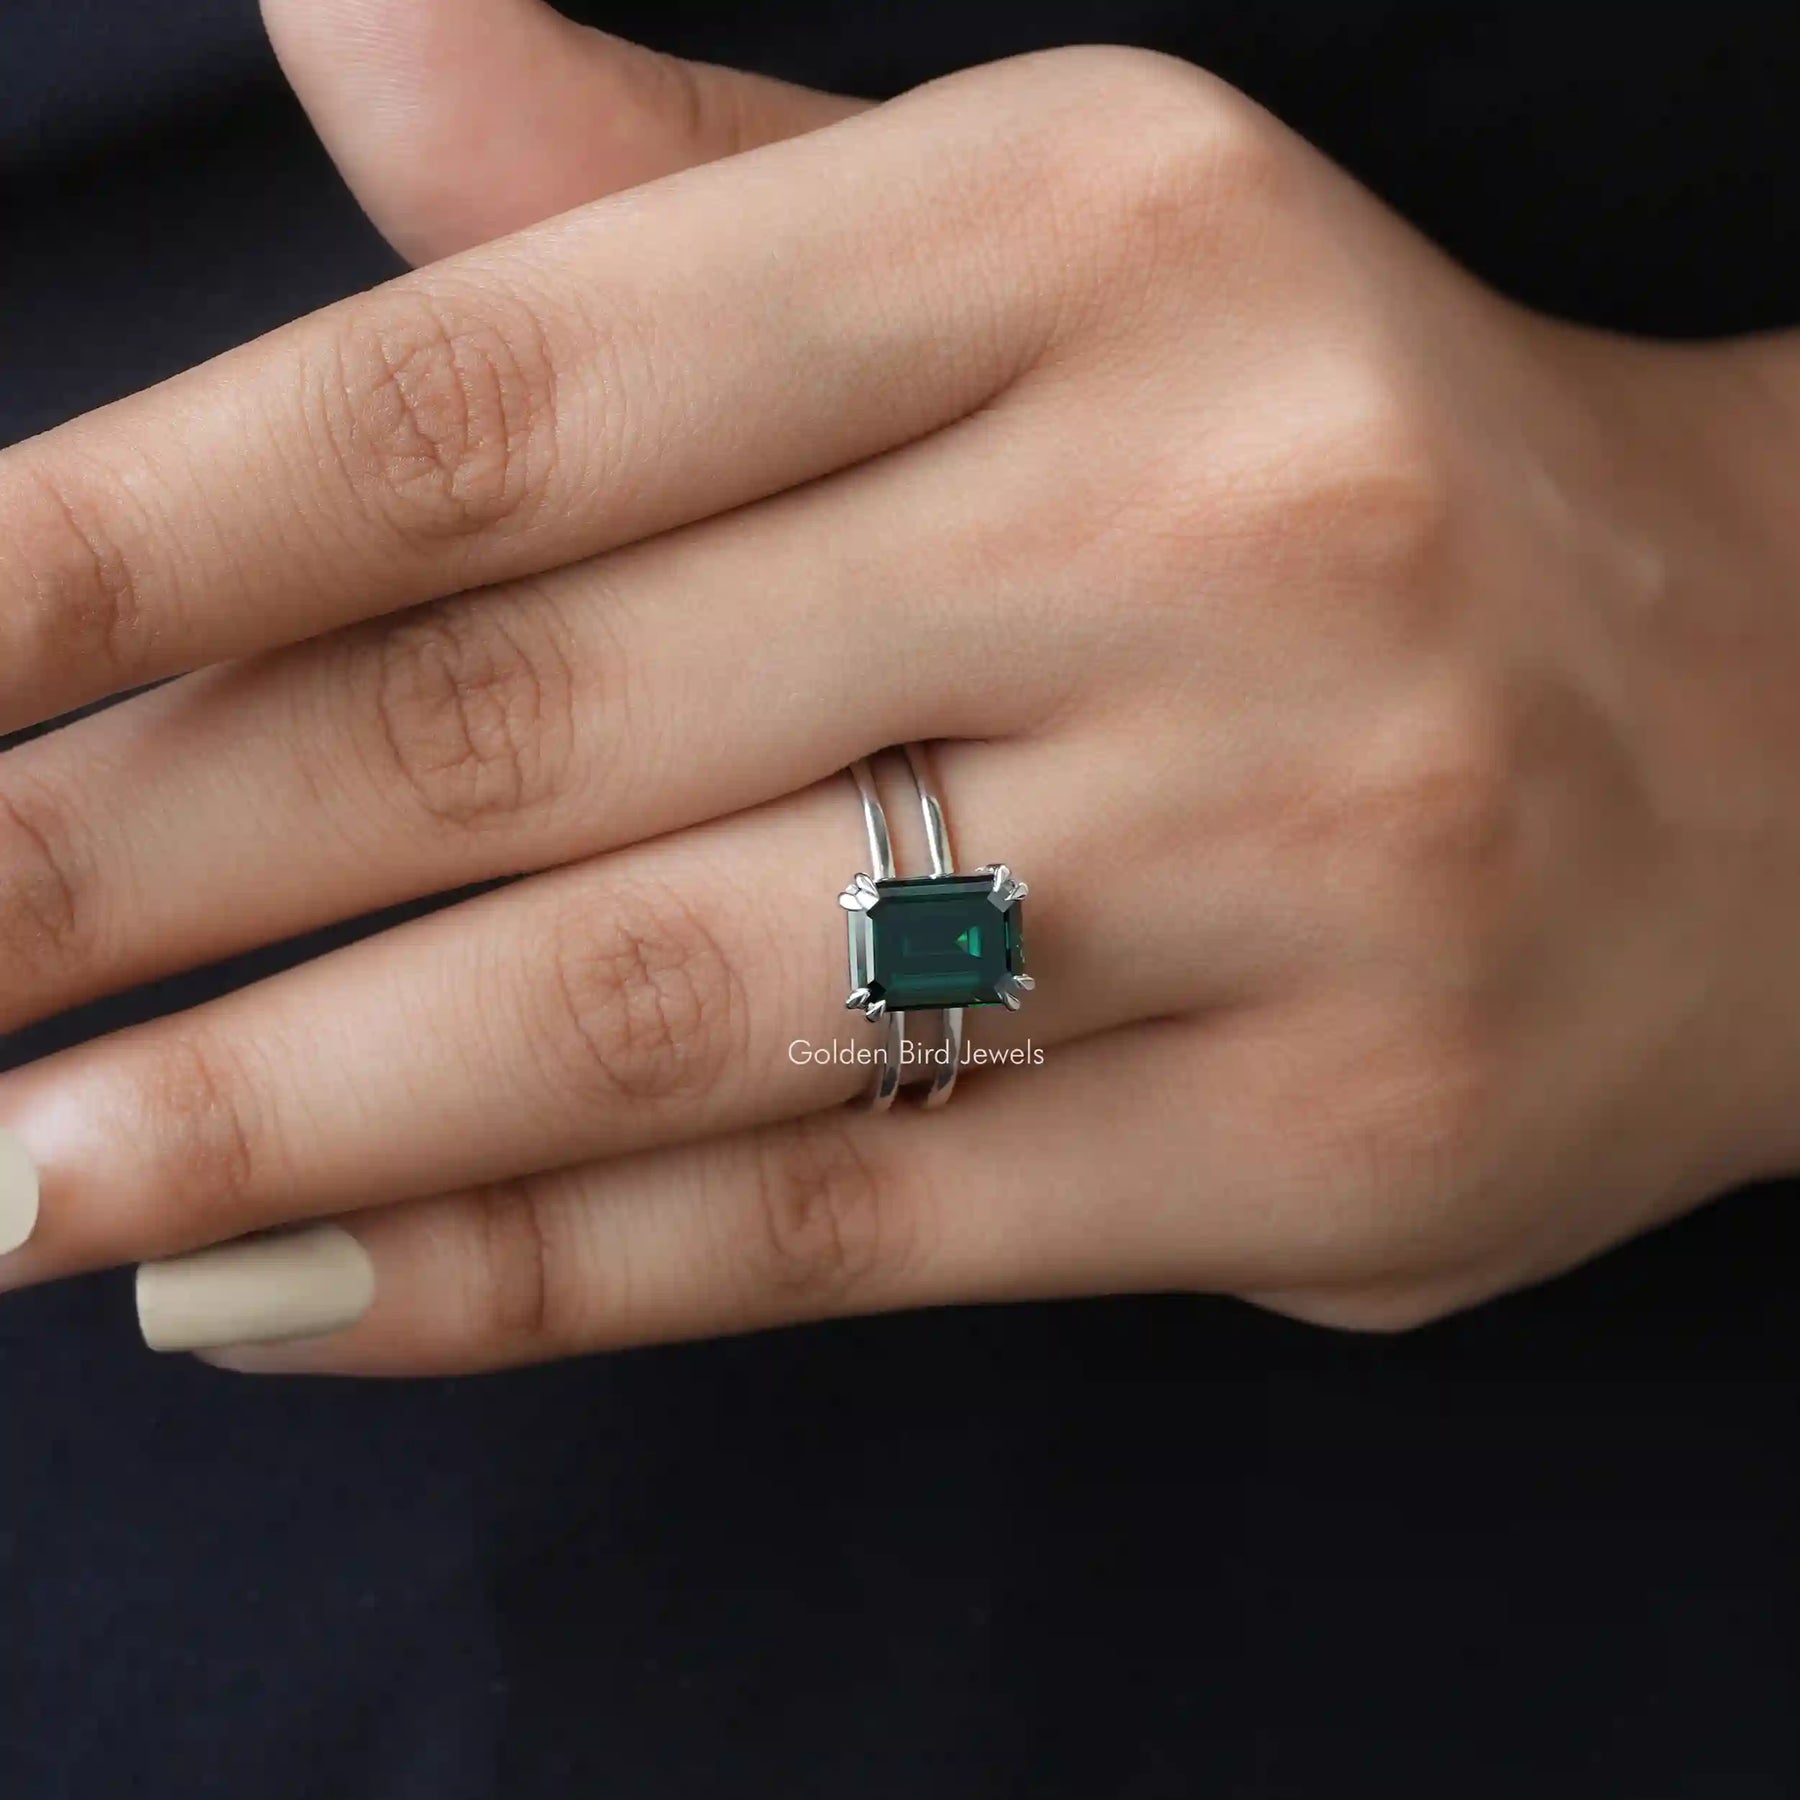 [In Finger Front View Of Solitaire Emerald Cut Moissanite Engagement Ring]-[Golden Bird Jewels]